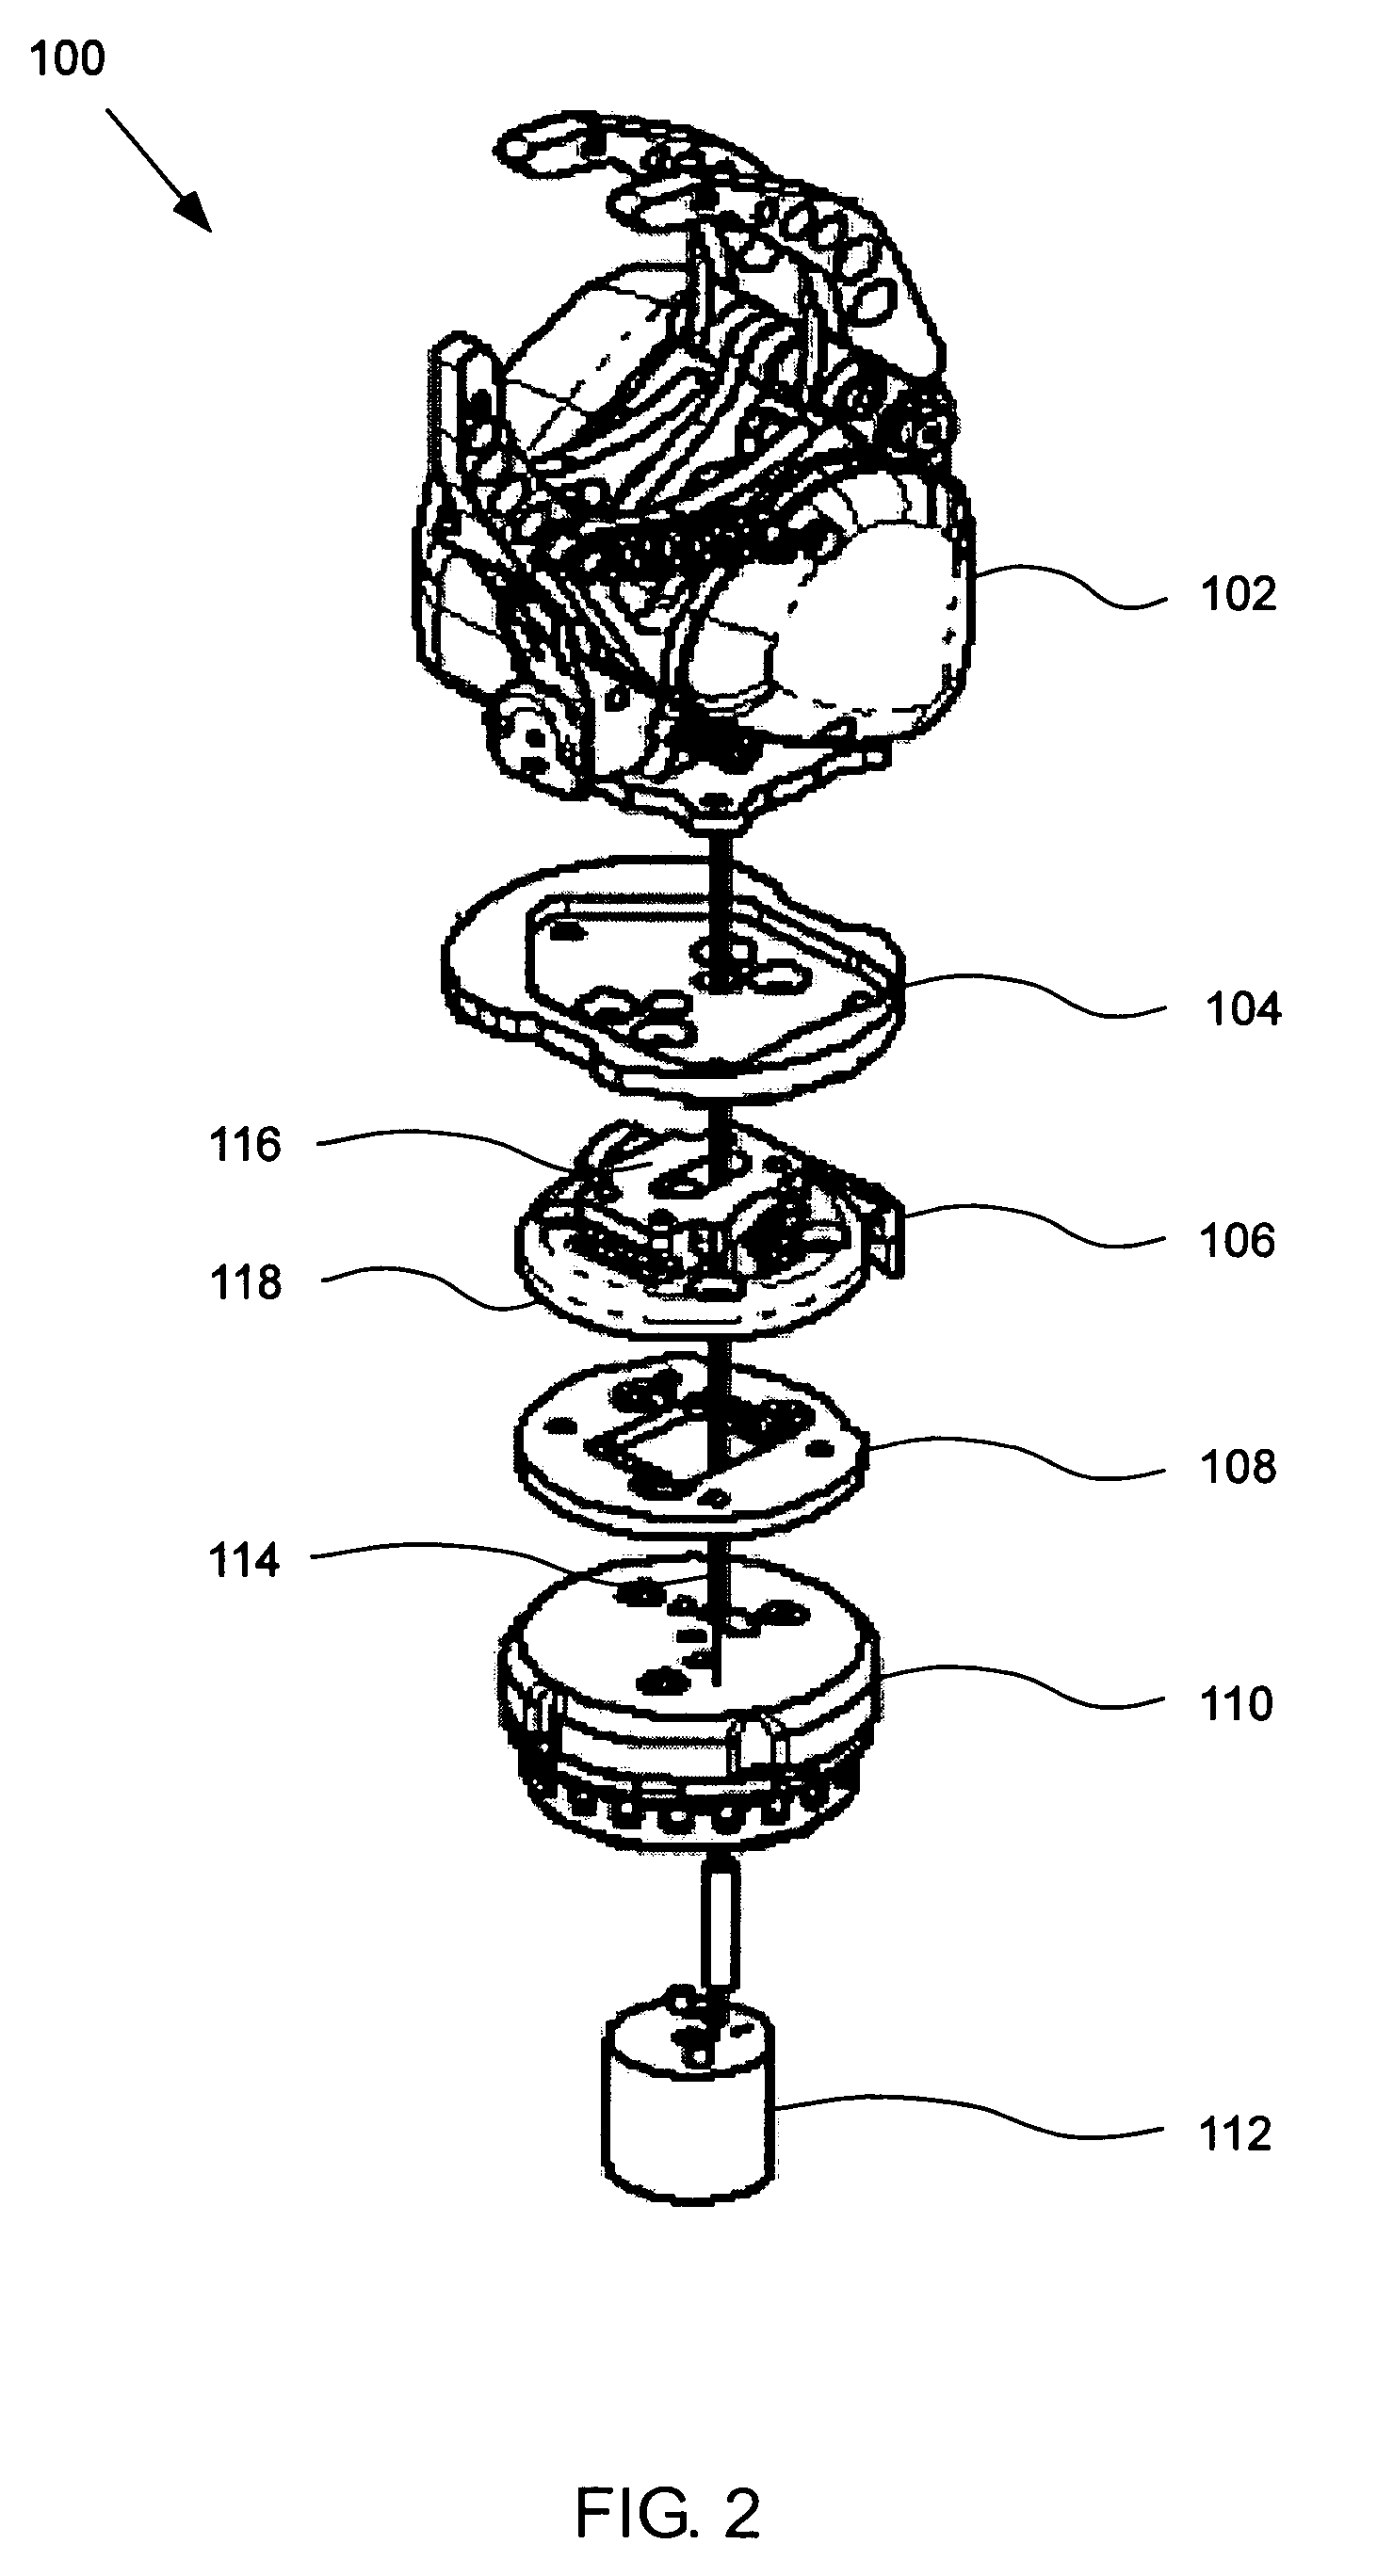 Wrist device for use with a prosthetic limb